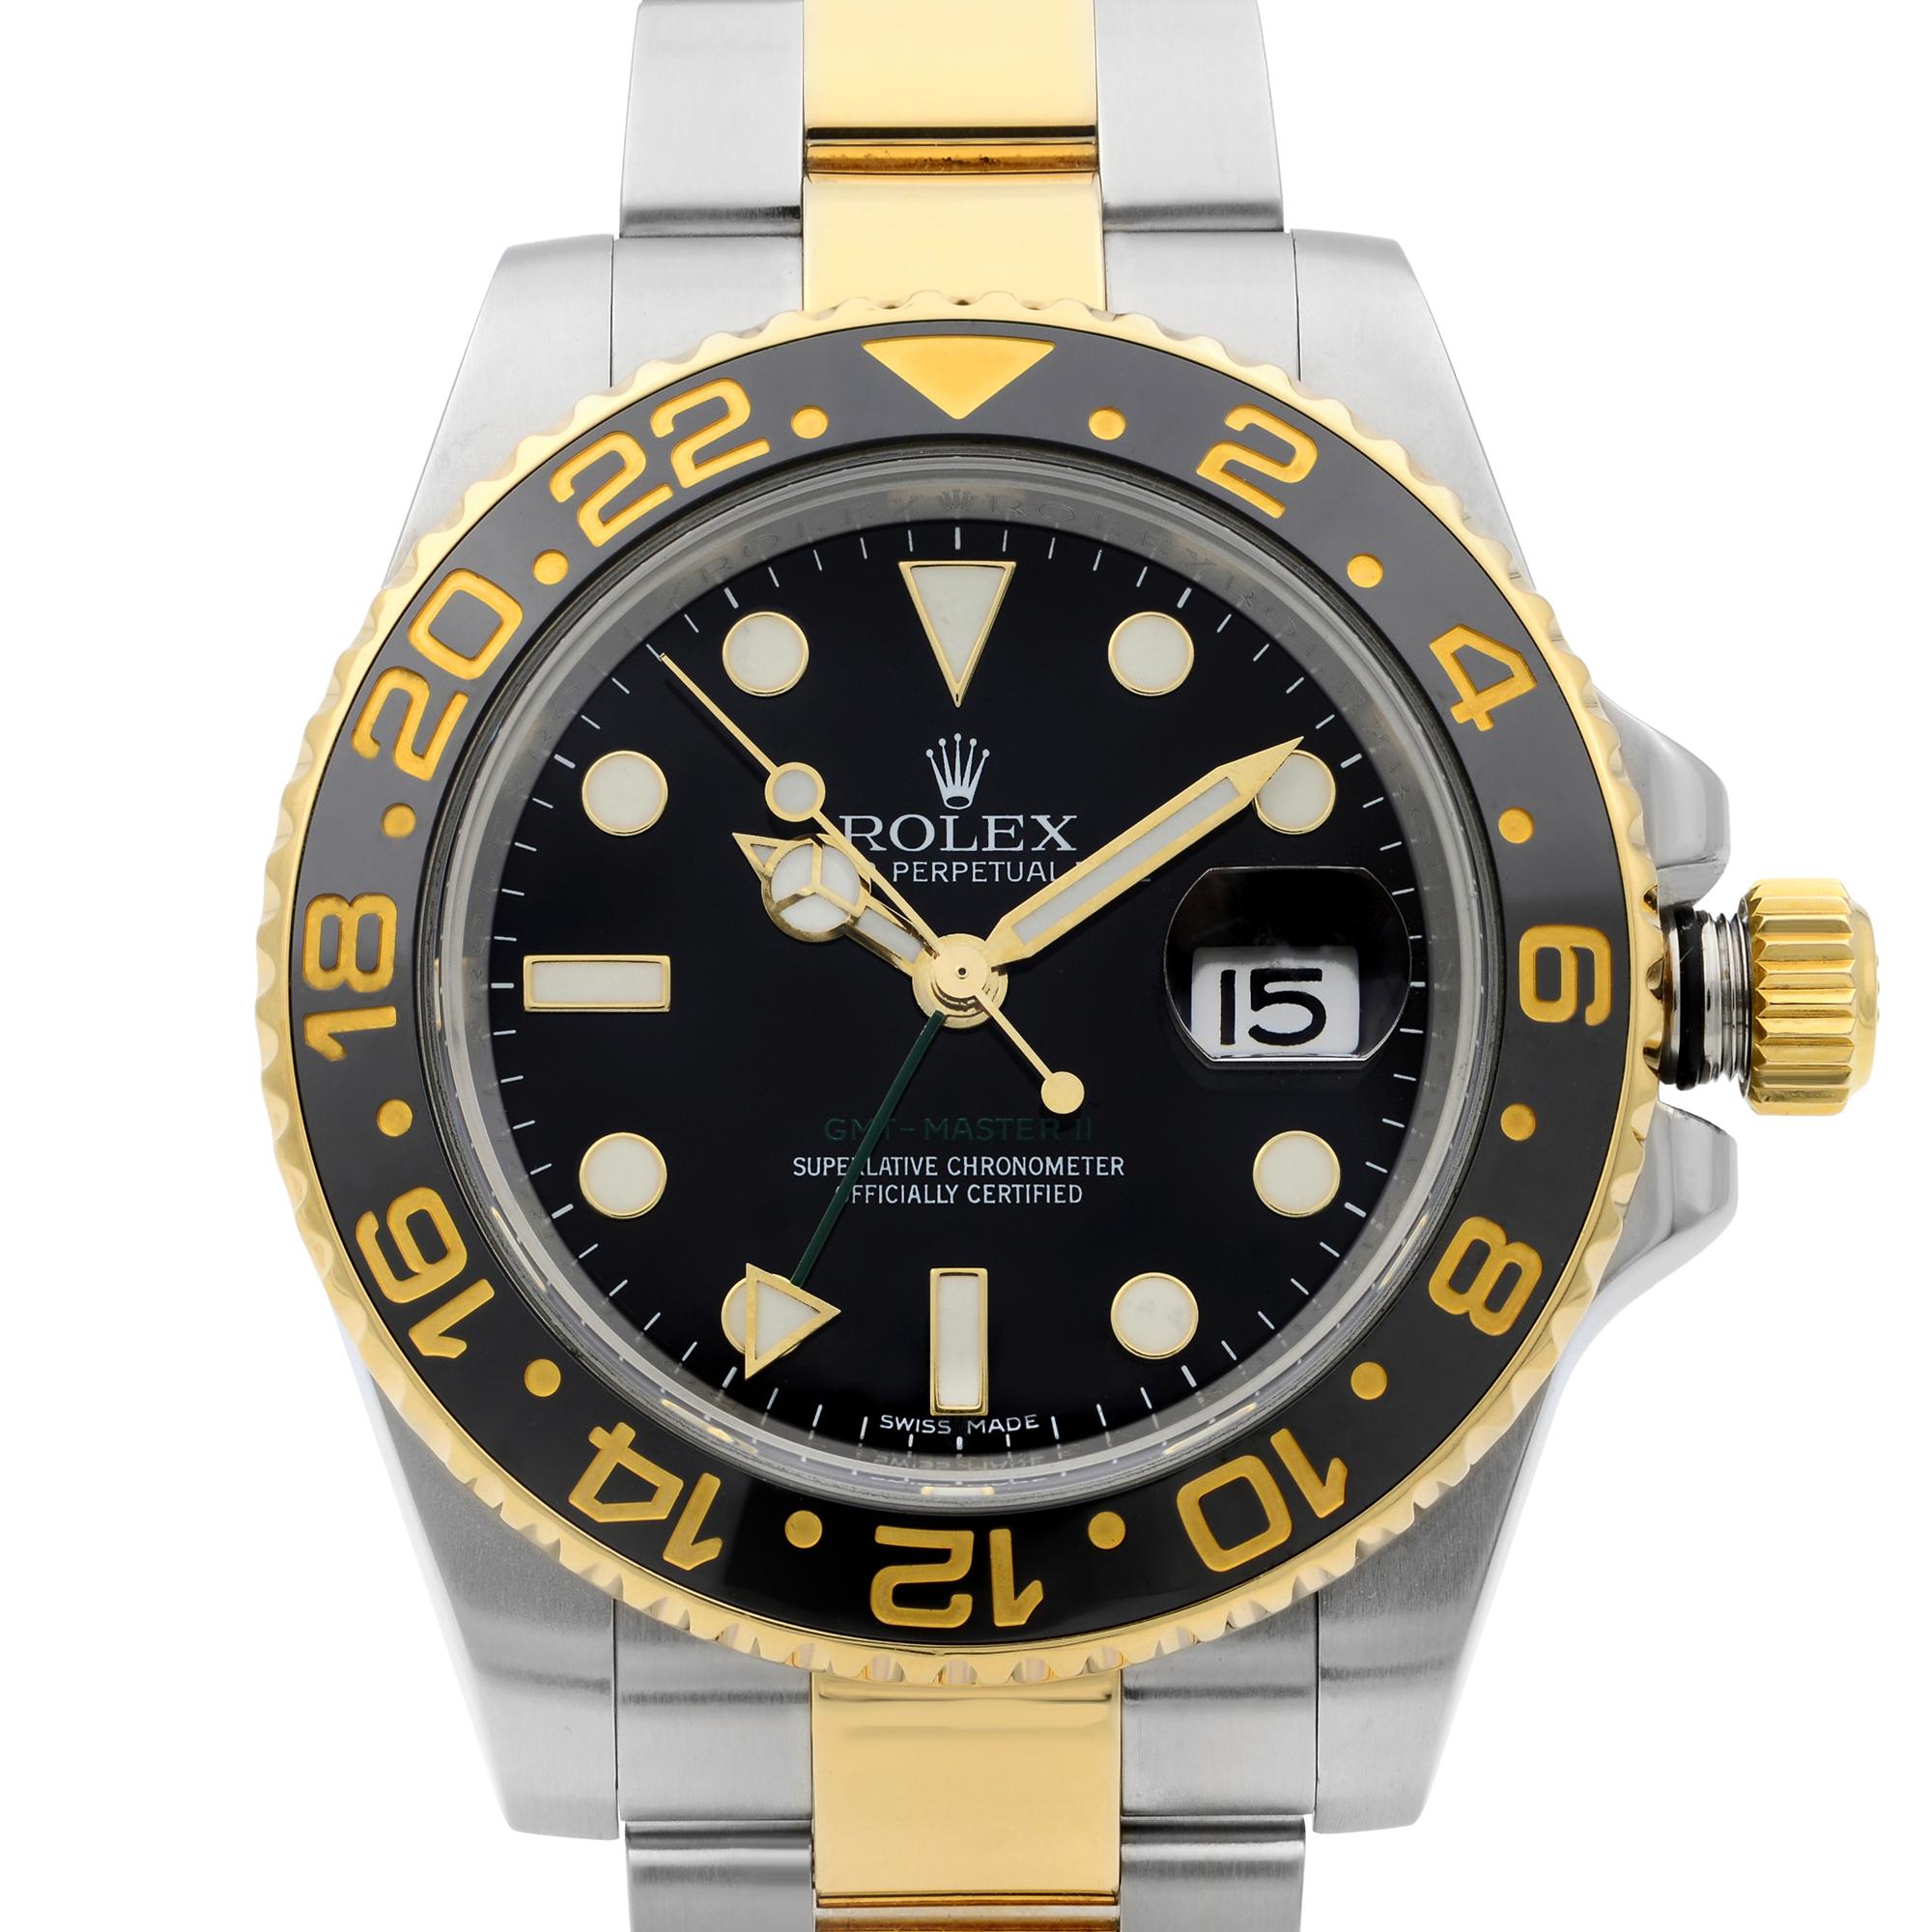 This pre-owned Rolex GMT-Master II 116713LN is a beautiful men's timepiece that is powered by mechanical (automatic) movement which is cased in a stainless steel case. It has a round shape face, date indicator, dual time dial and has hand sticks &